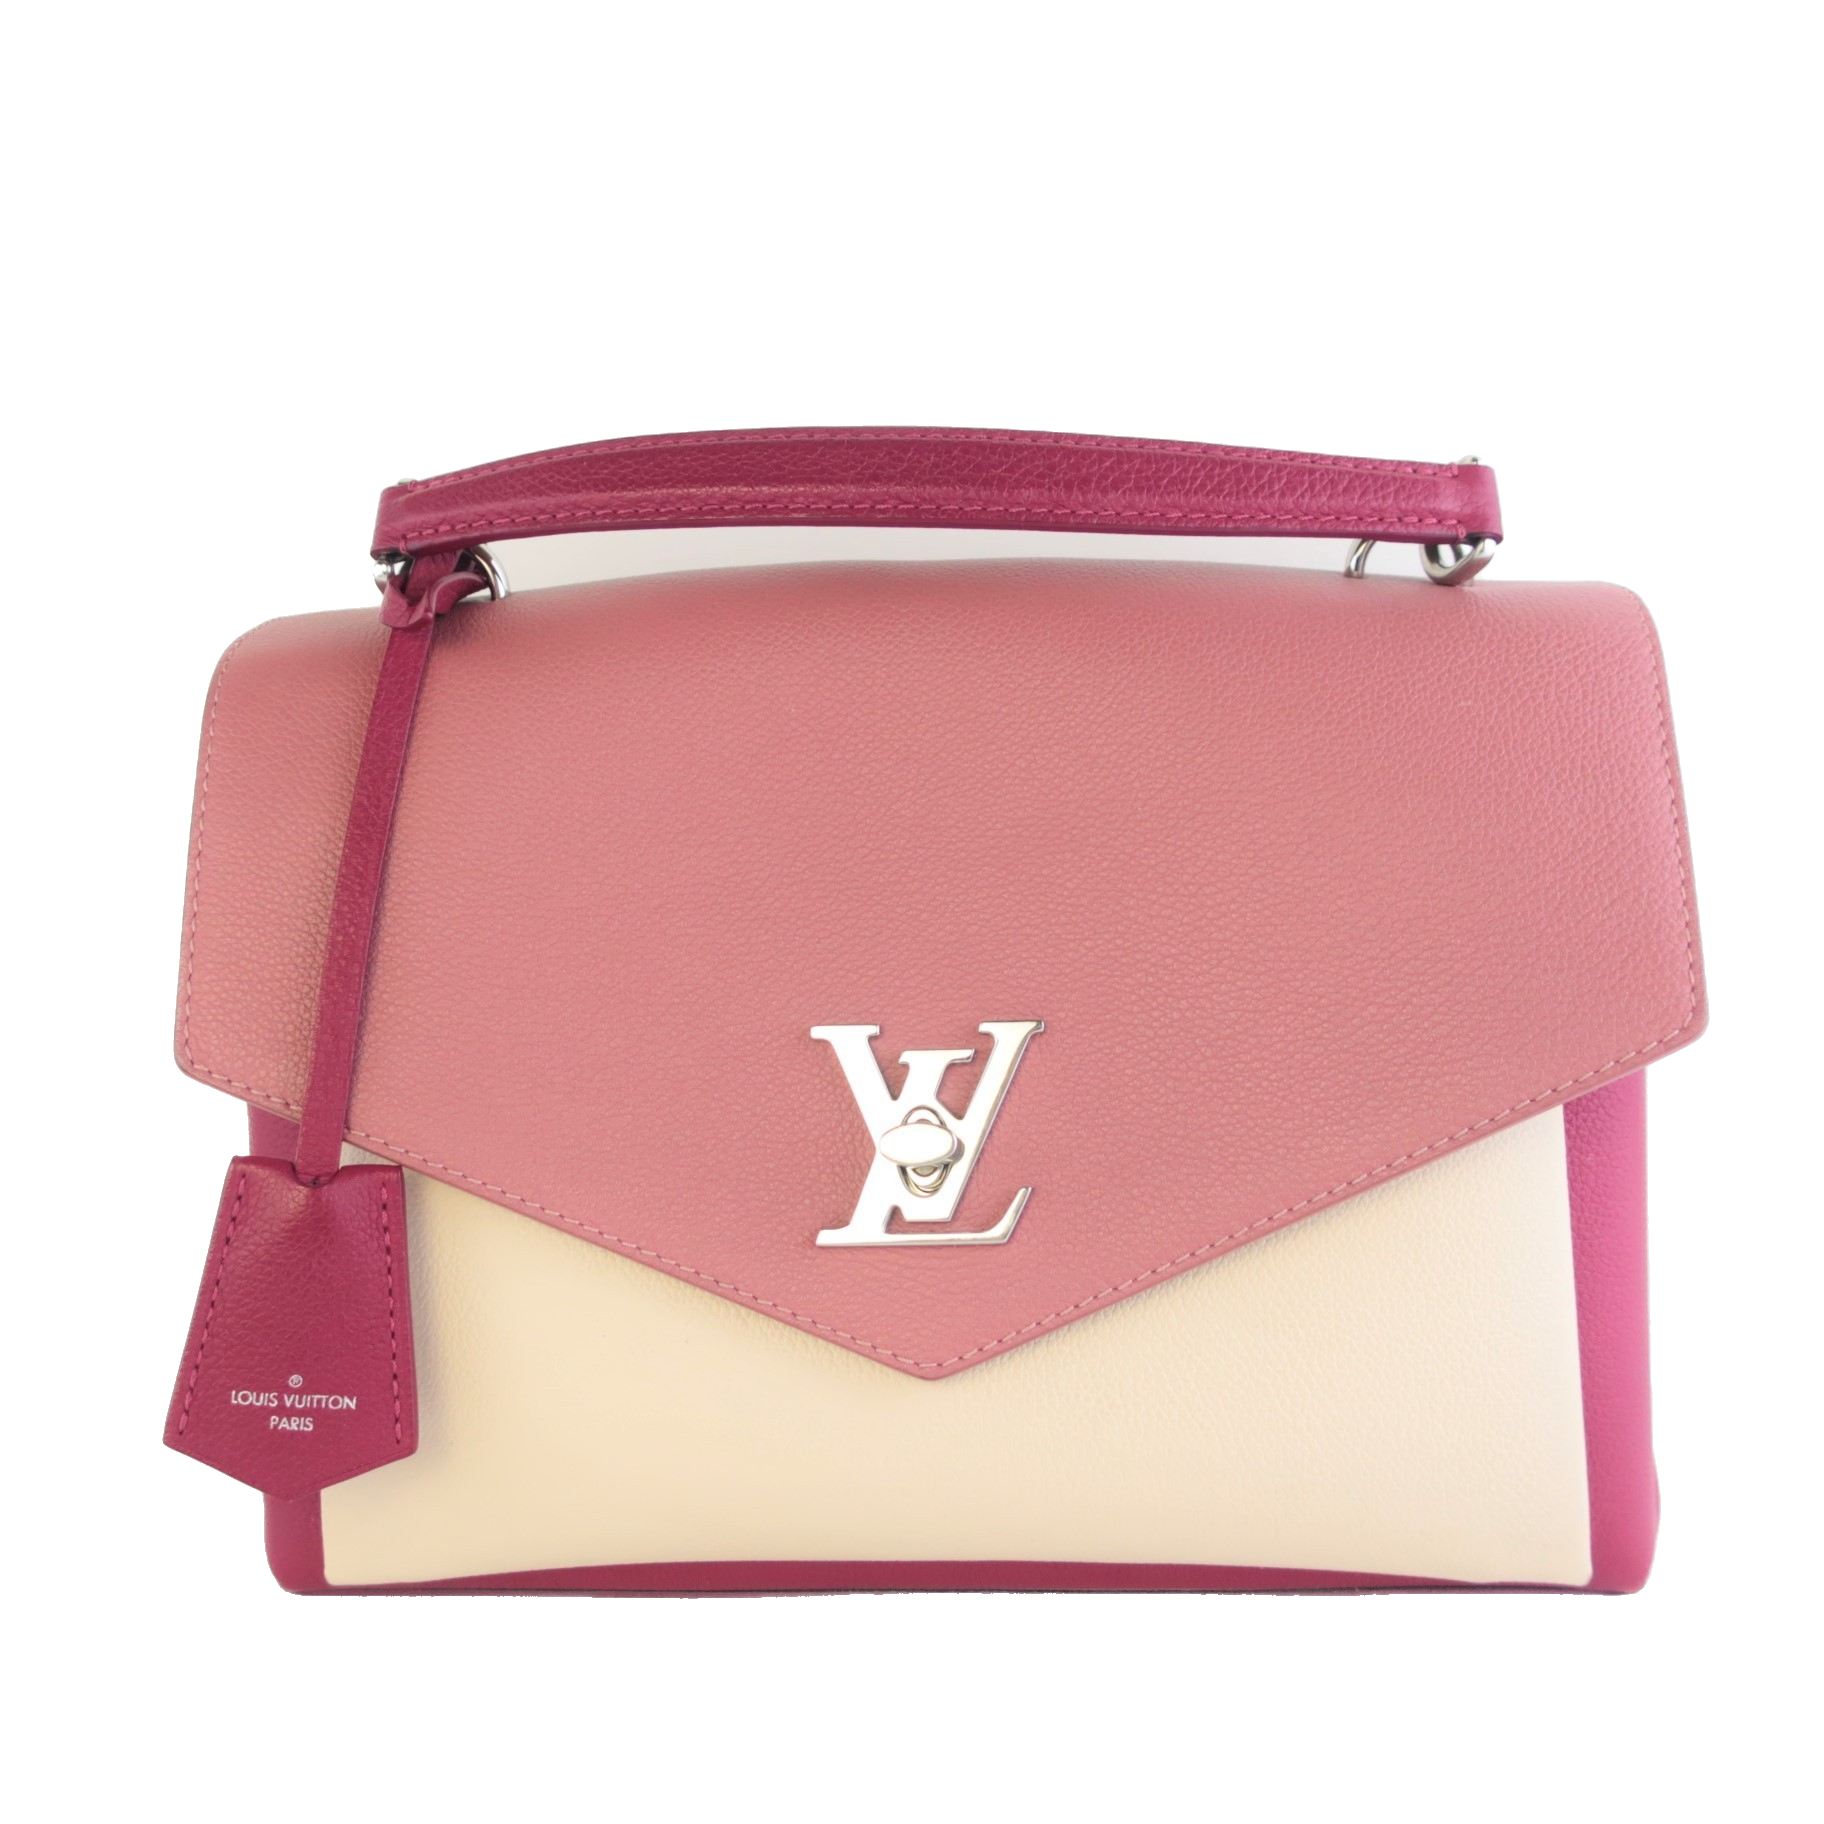 Spring-Summer 2021 Bag Trends: How To Stay Fashionable Shopping Pre-Owned Louis Vuitton Mylockme Bag